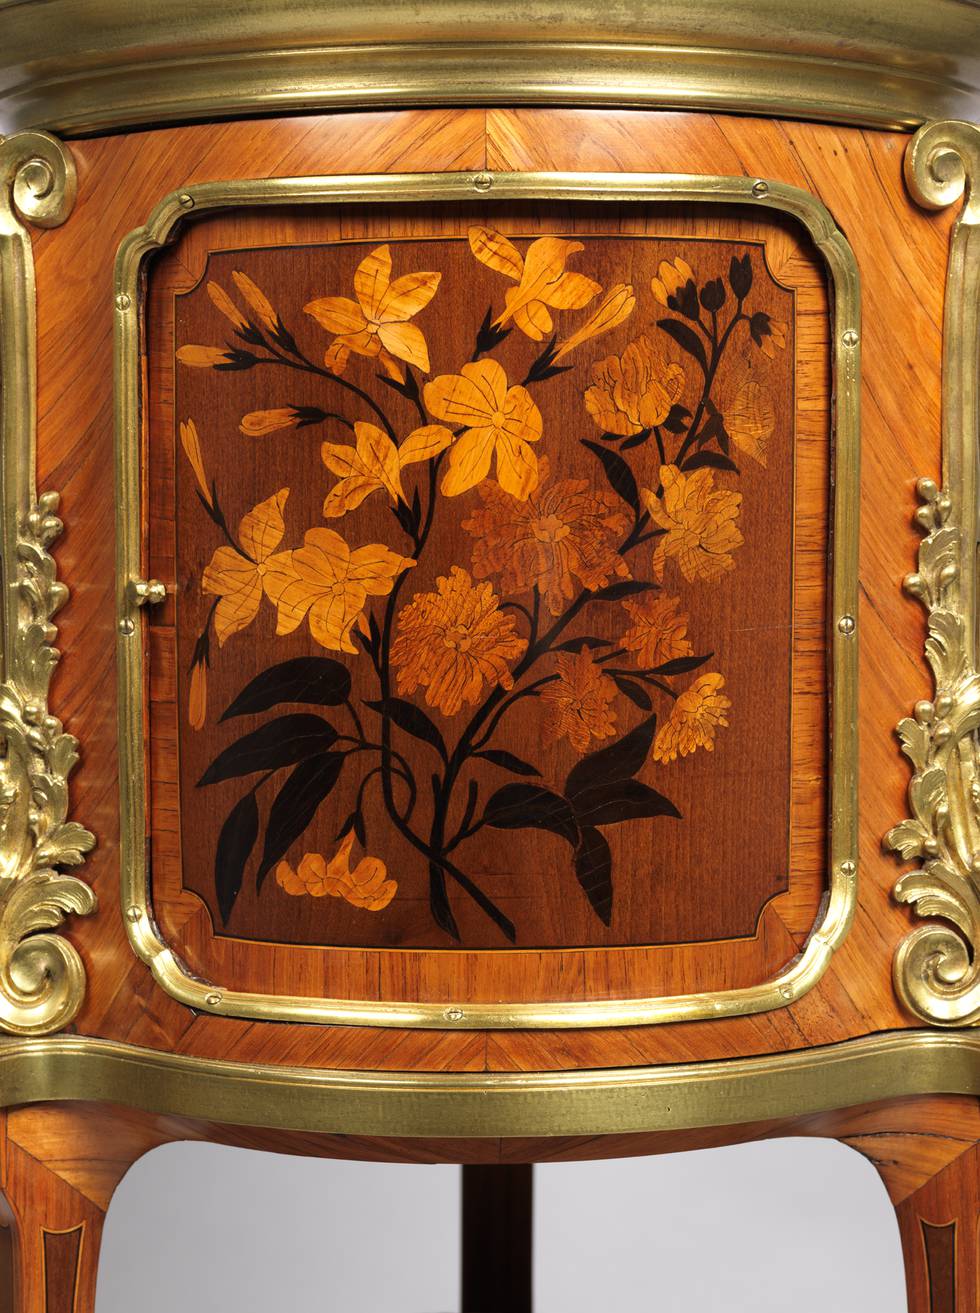 A detail of marquetry flowers on a work table